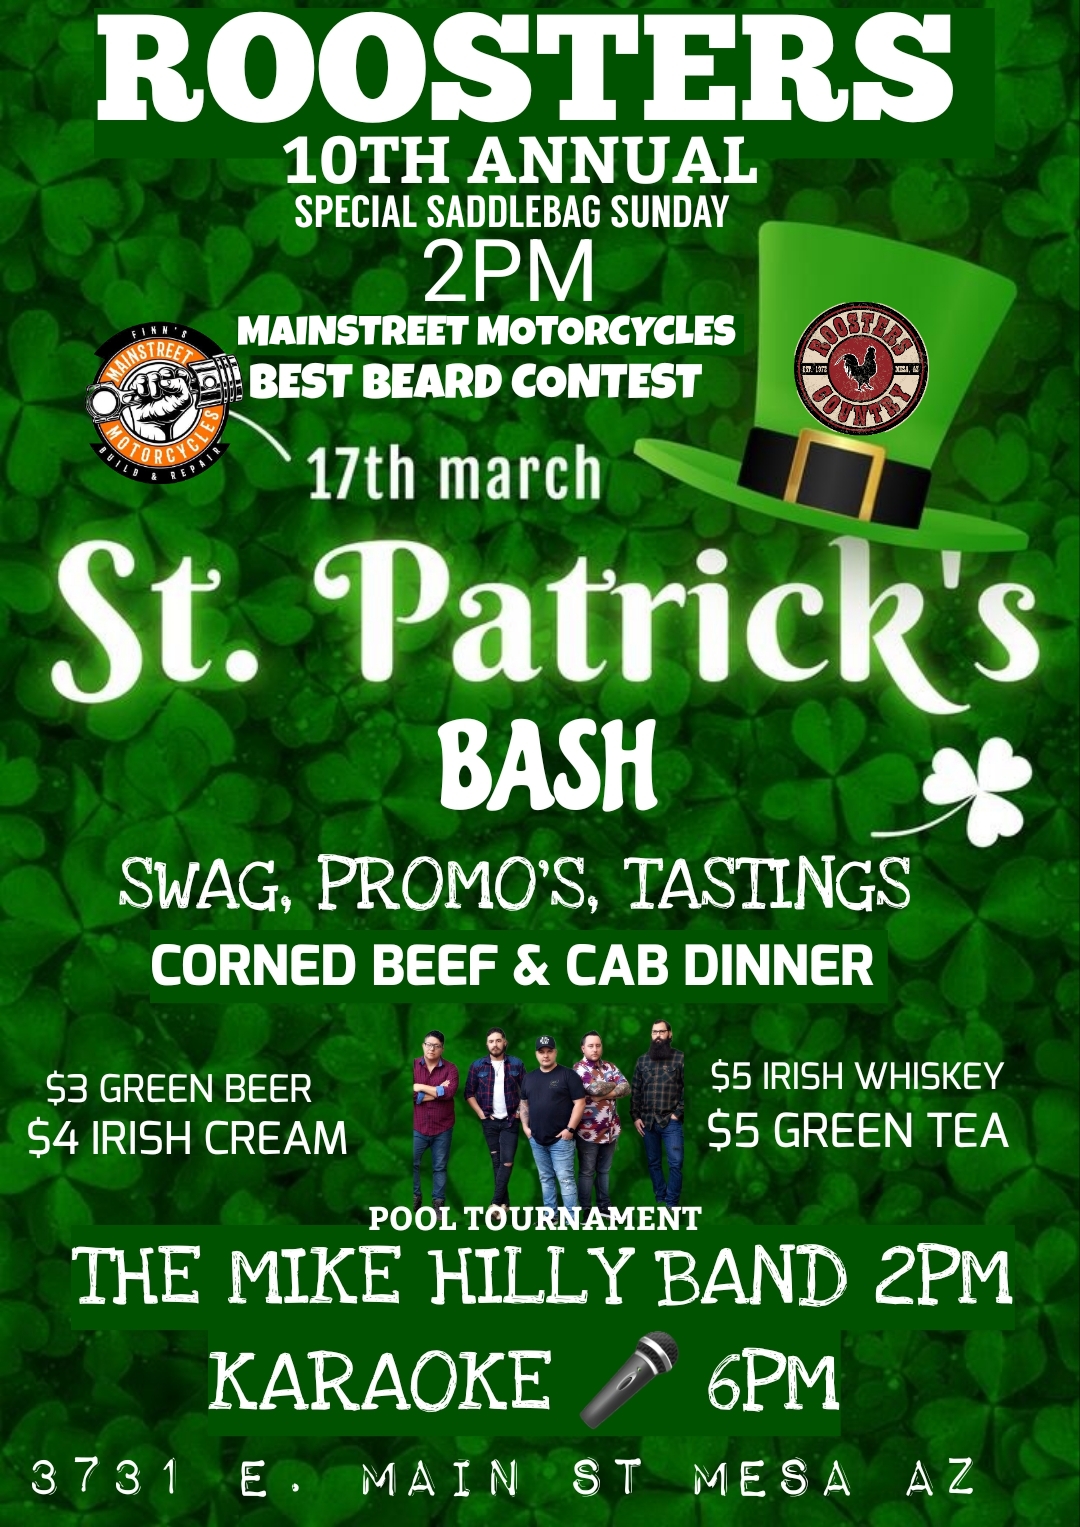 St. Patrick’s Day Bash with The Mike Hilly Band